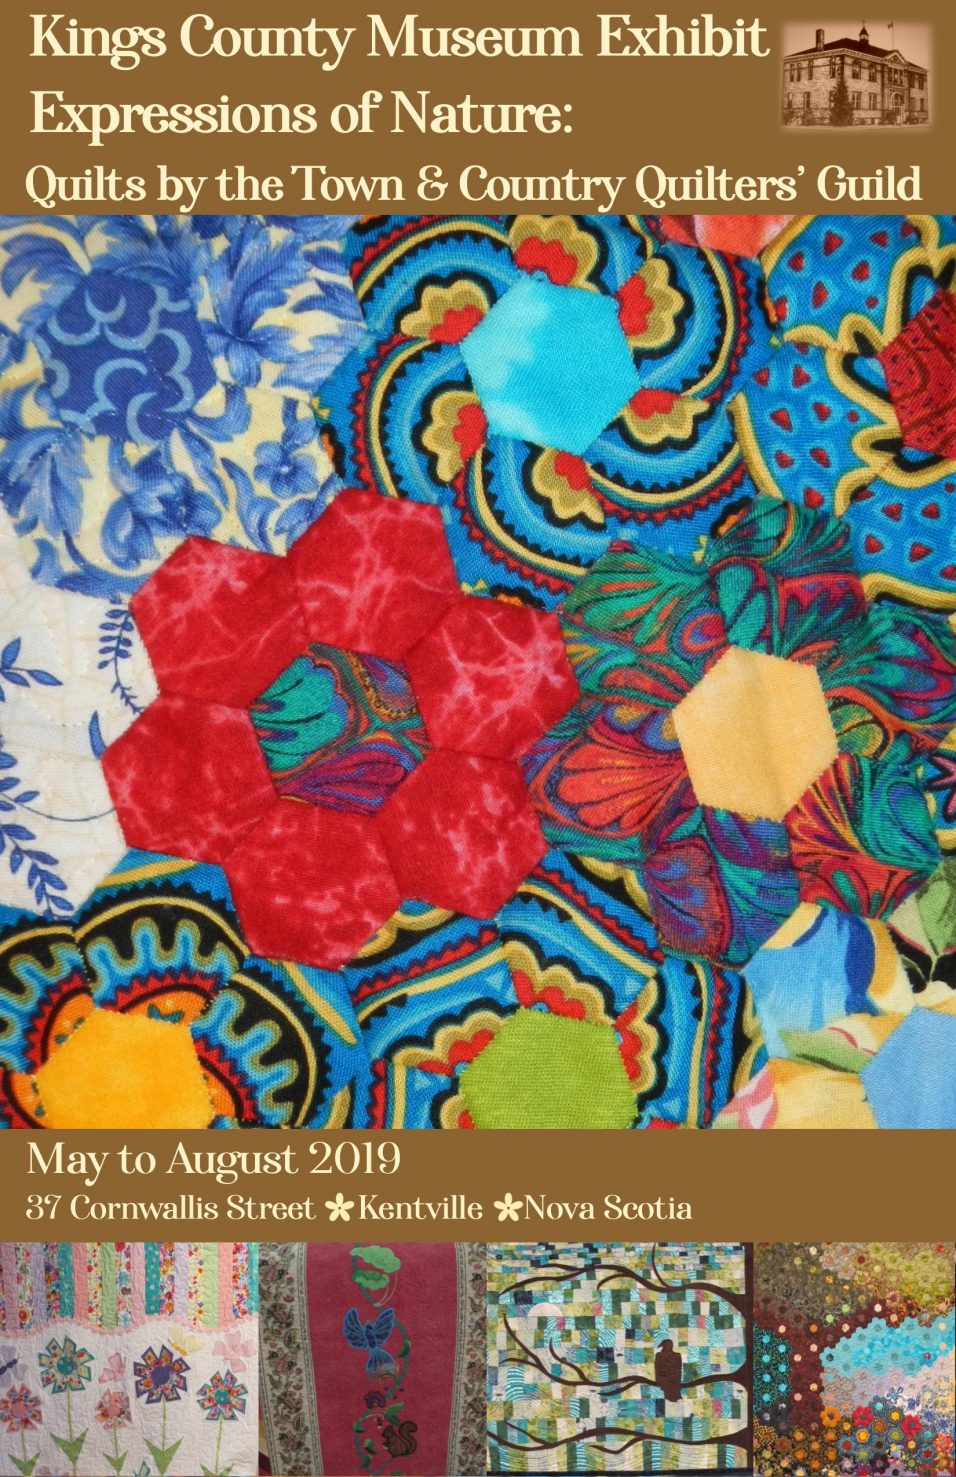 â€œExpressions of Nature: Quilts by the Town & Country Quiltersâ€™ Guildâ€